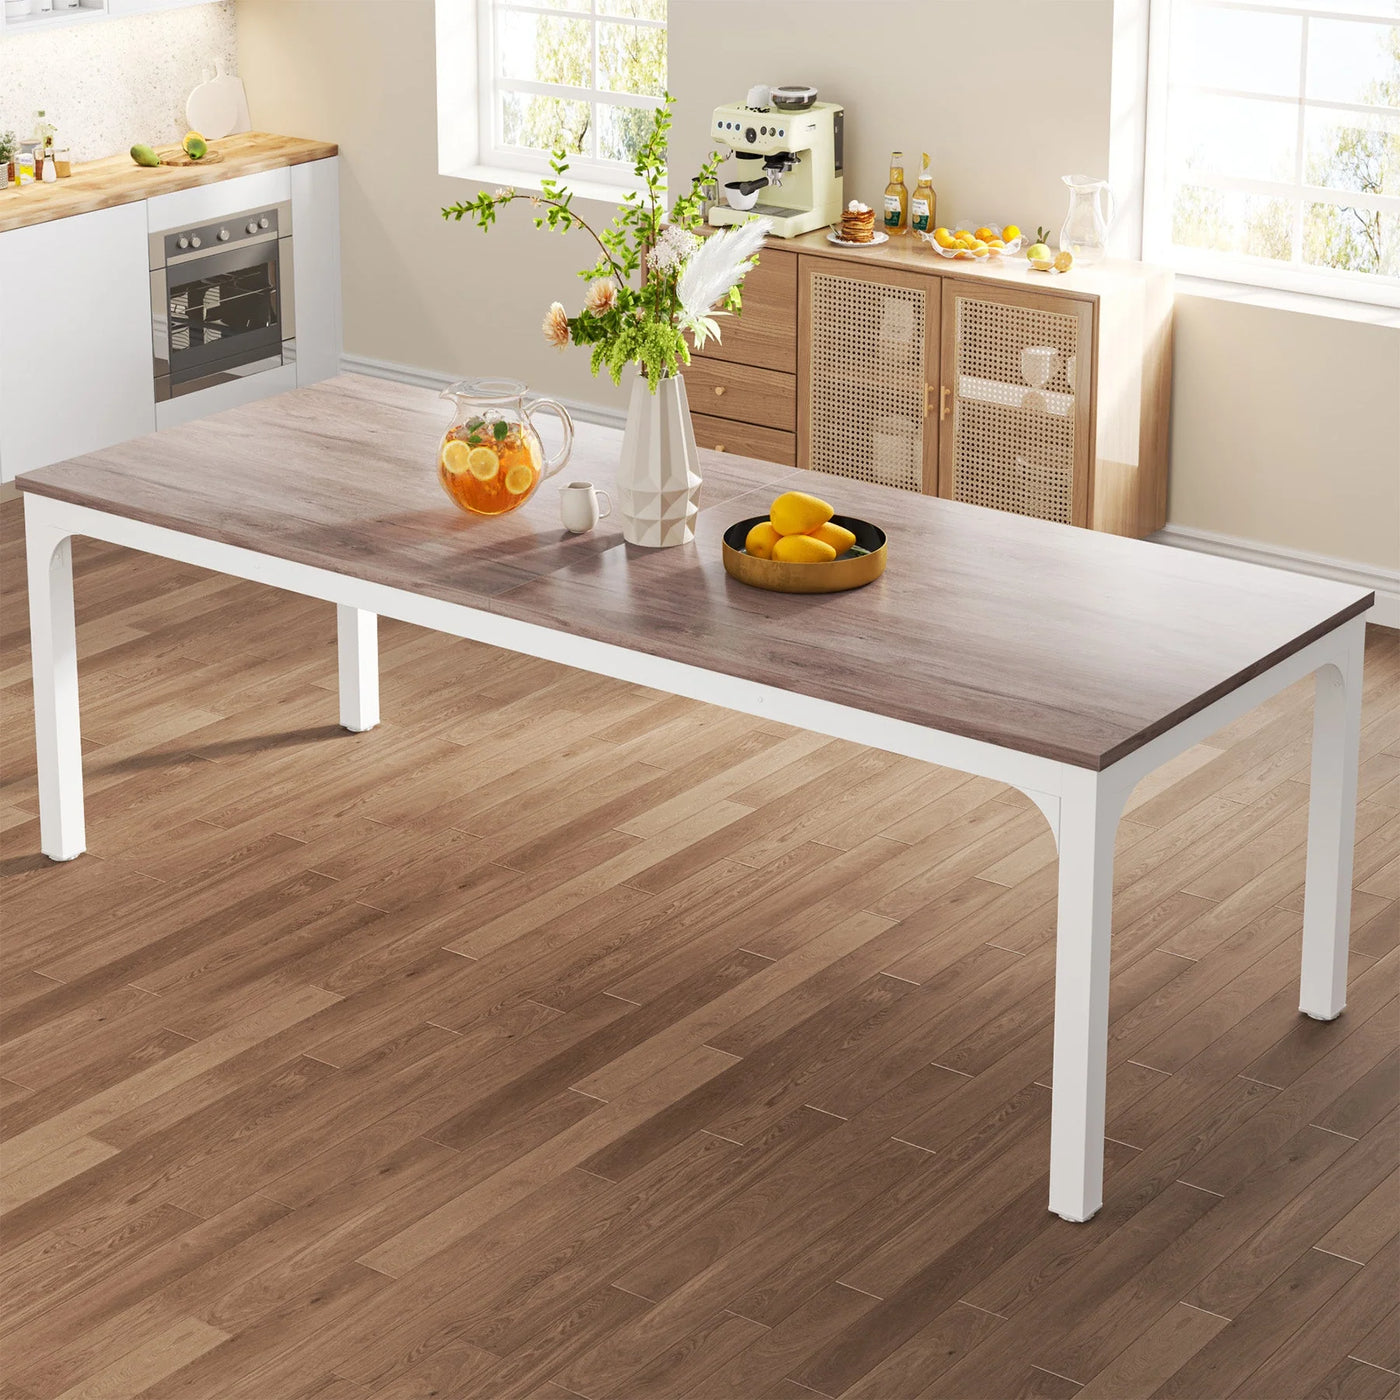 Charlotte Rectangular Dining Table | 78 inch Long Wood Kitchen Table for 6-8 People